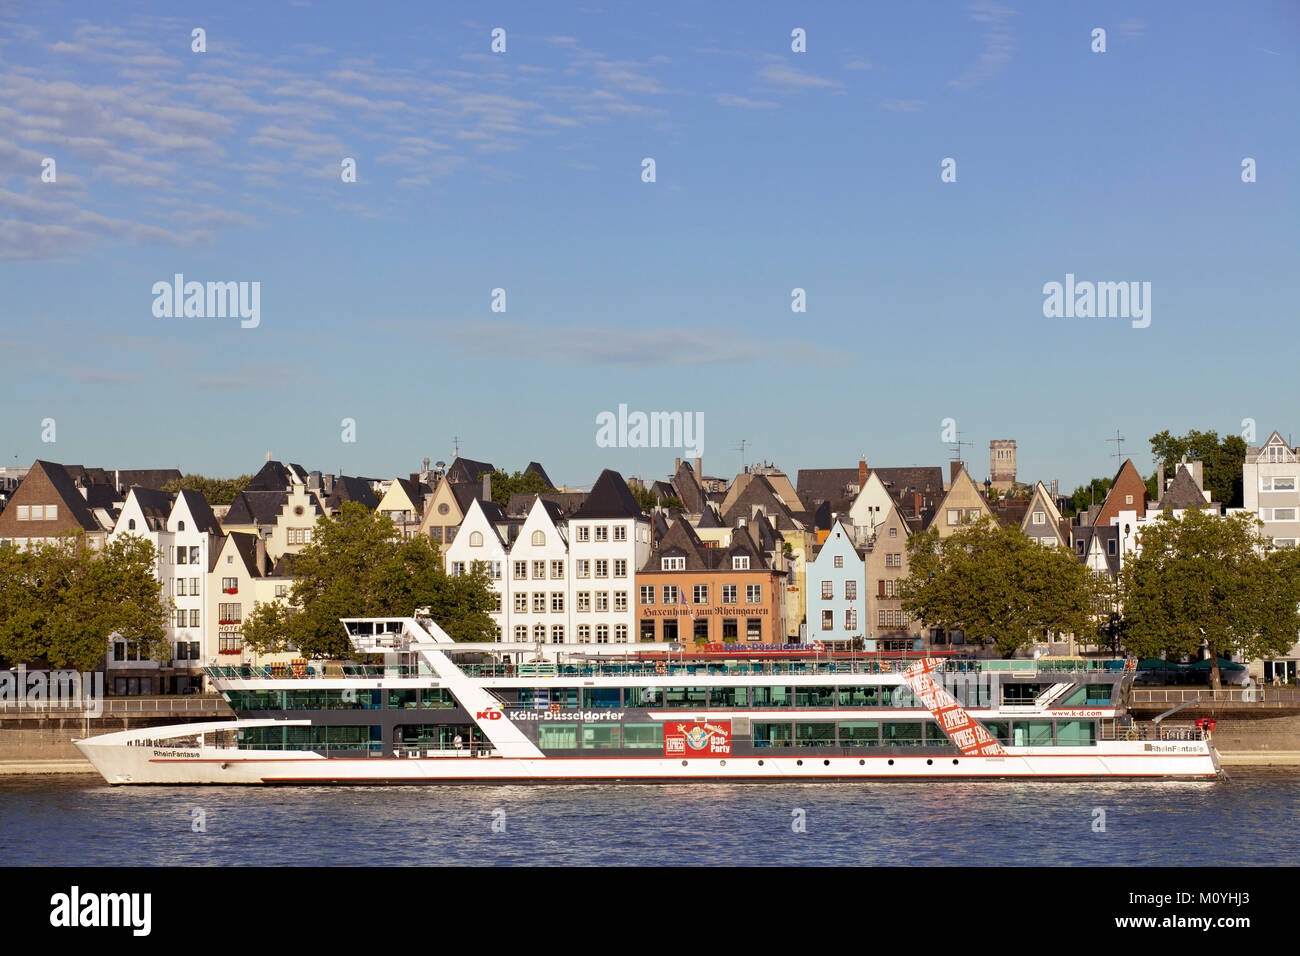 Germany, Cologne, view across the river Rhine to old part of the town,  ship of the ship cruise company Koeln-Duesseldorfer Deutsche Rheinschiffahrt A Stock Photo